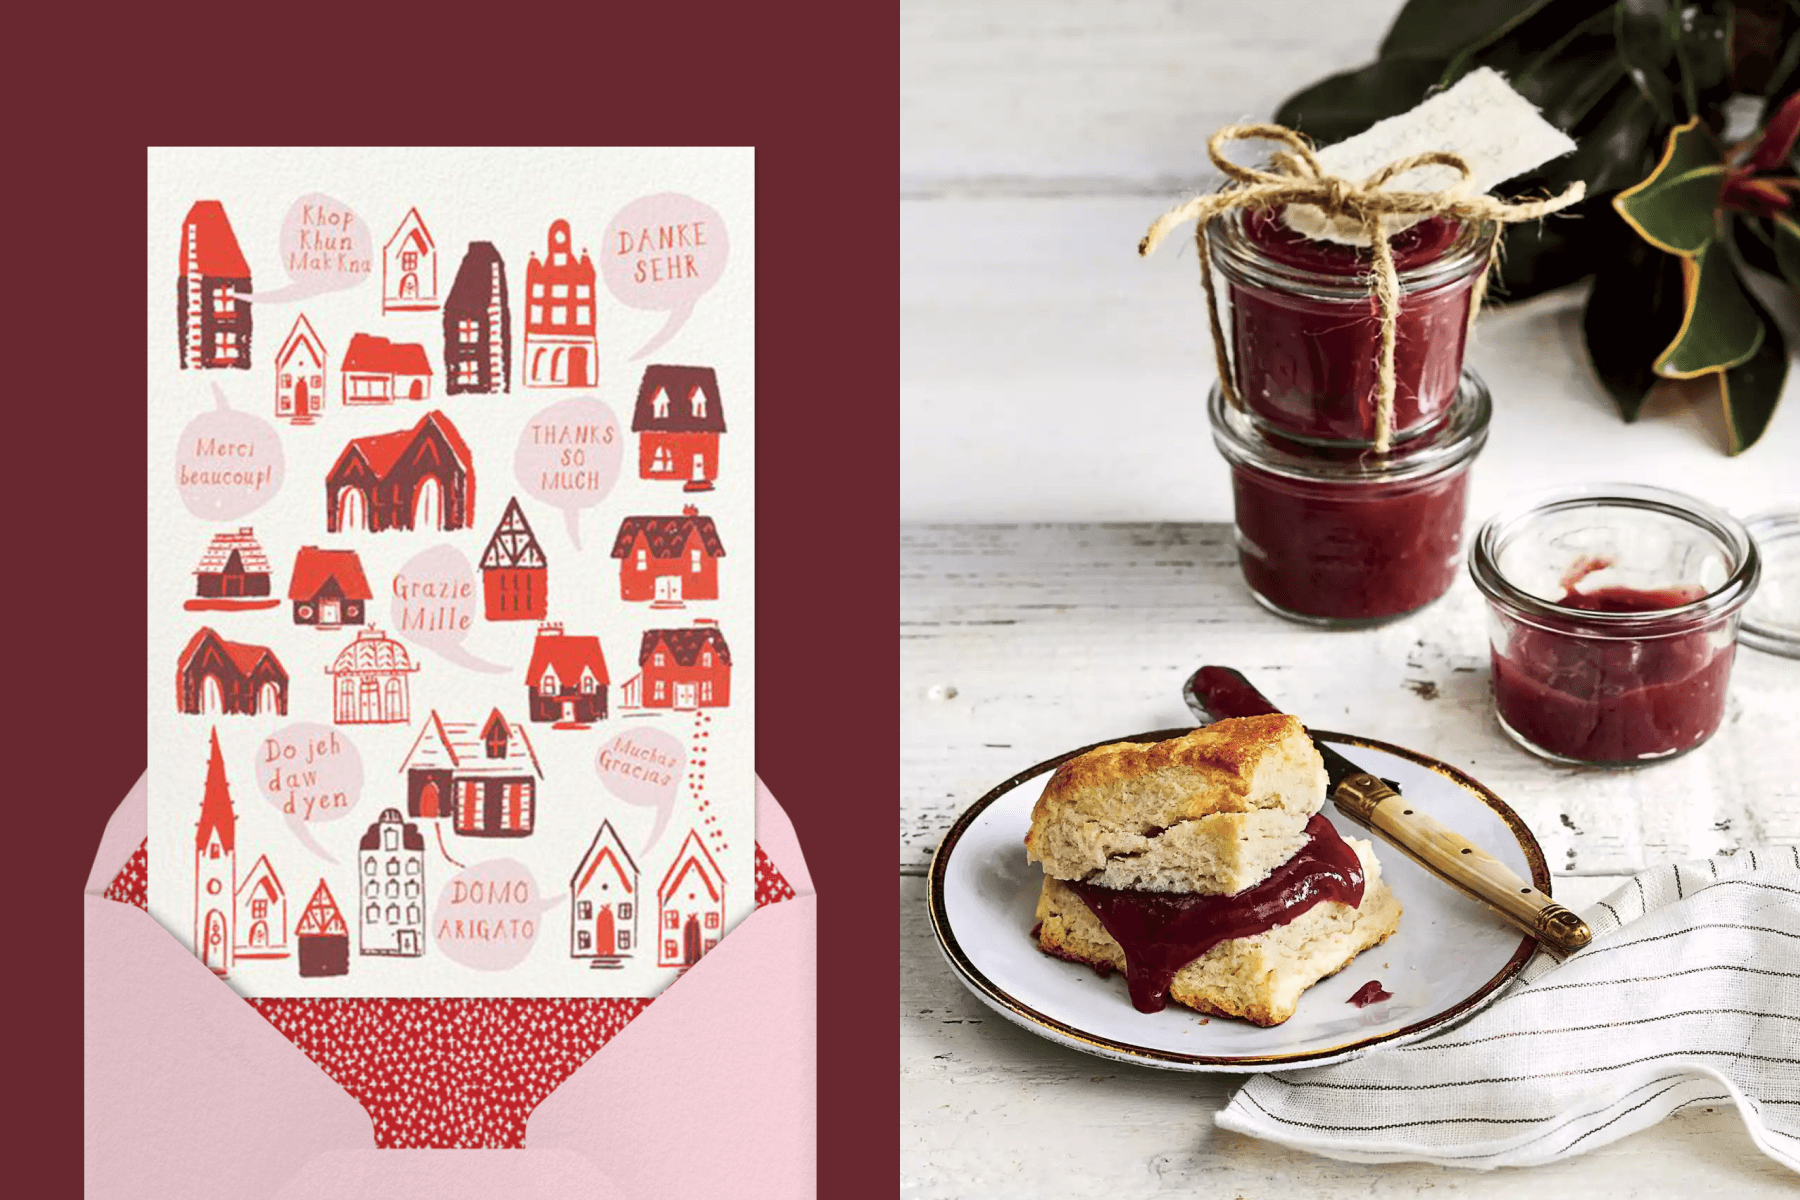 Left: A cream thank you card with red and pink illustrations of differently shaped houses with word bubbles that read “thank you” in different languages, paired with a pink envelope; right: a gift of three jam jars and a biscuit with jam on a plate.